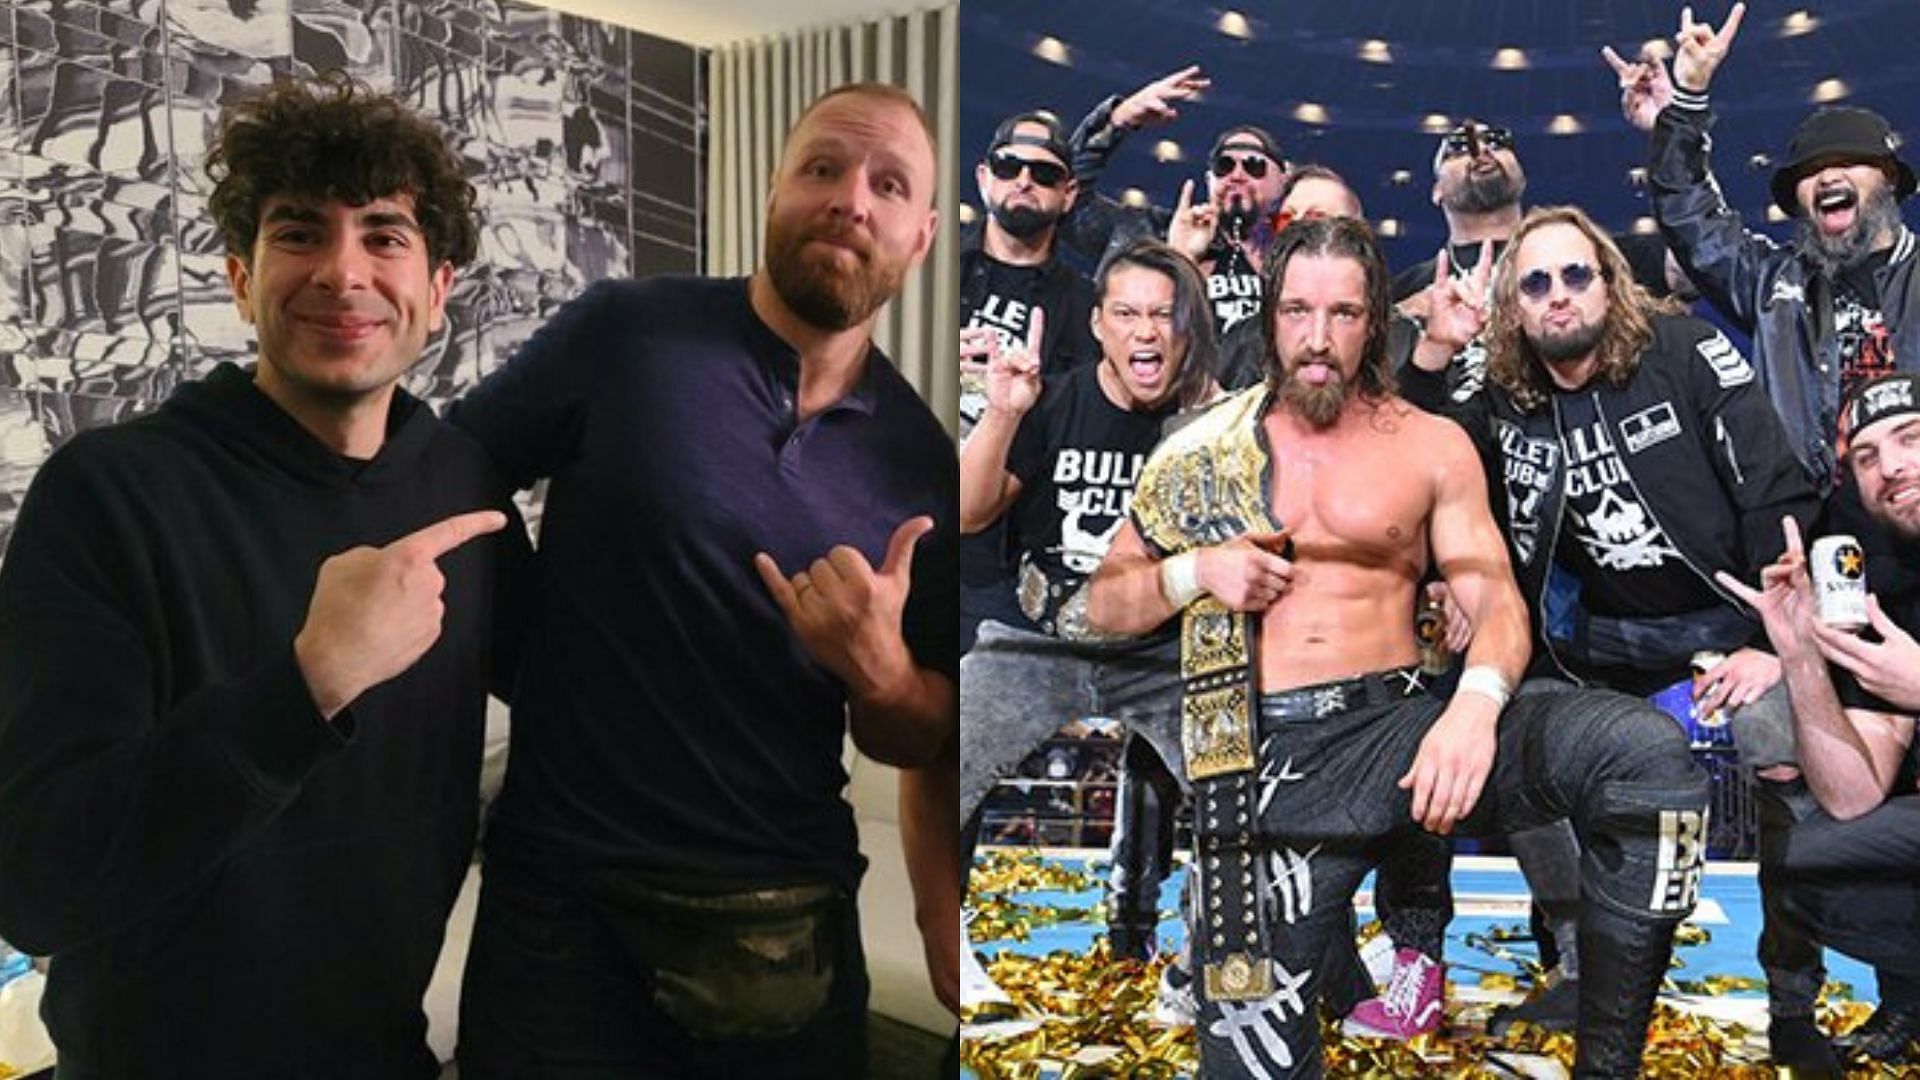 Tony Khan has shared a backstage photo with Jon Moxley and a Bullet Club member